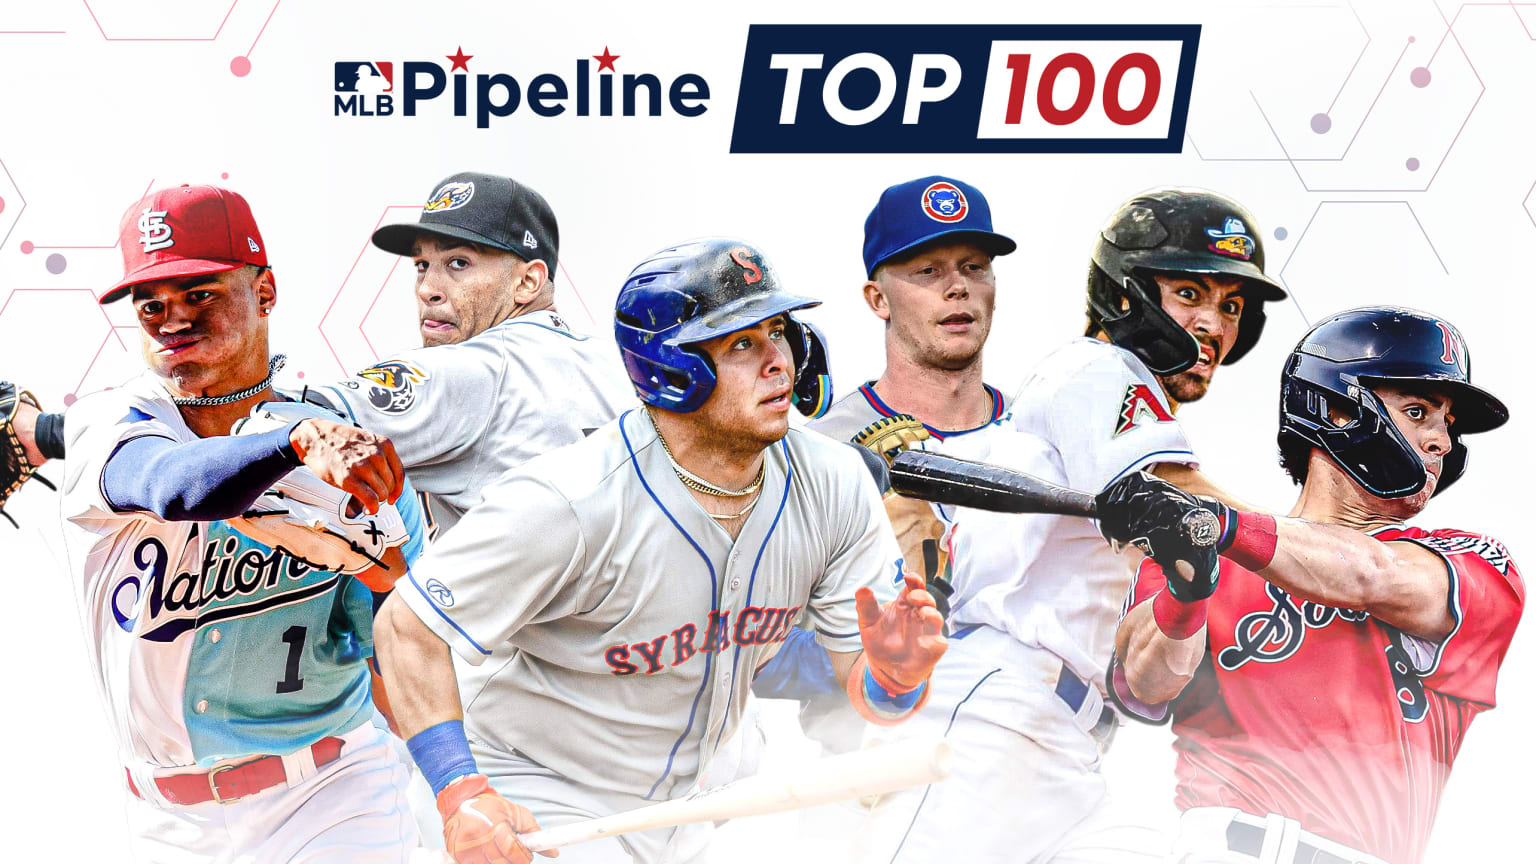 Six prospects are pictured below an MLB Pipeline Top 100 logo